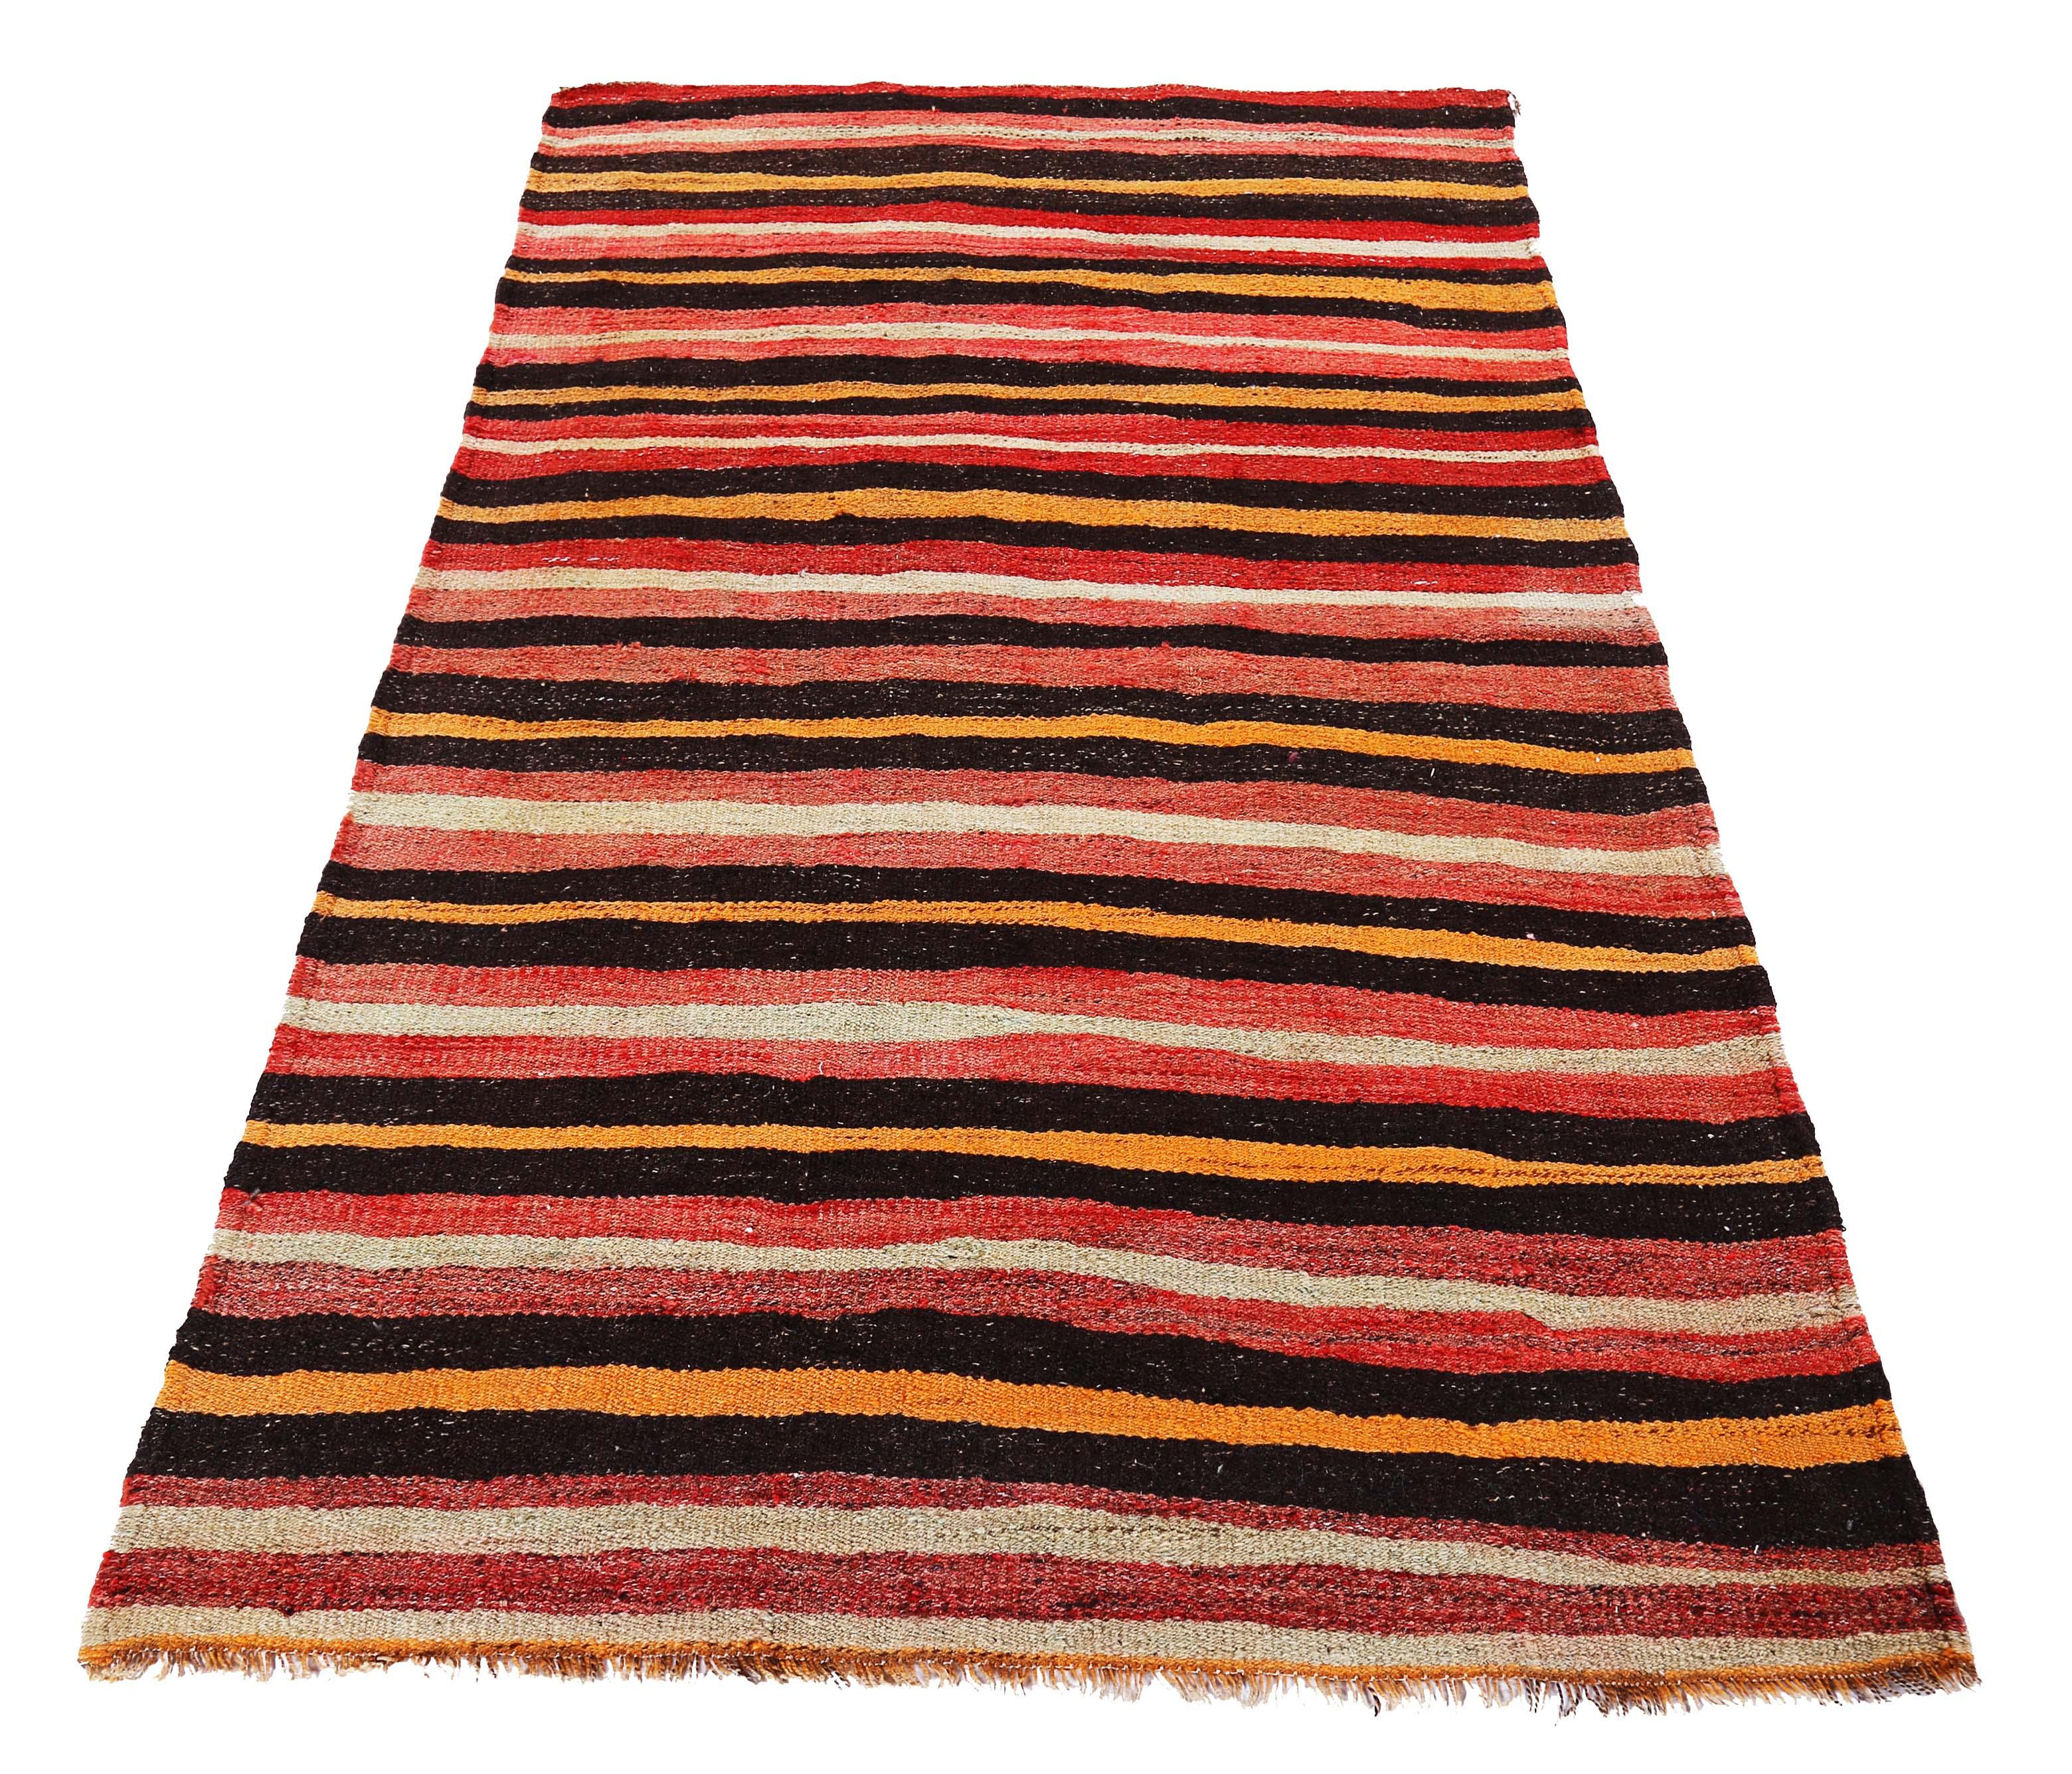 Turkish runner rug handwoven from the finest sheep’s wool and colored with all-natural vegetable dyes that are safe for humans and pets. It’s a traditional Kilim flat-weave design featuring a black and orange stripes over a red and ivory field. It’s